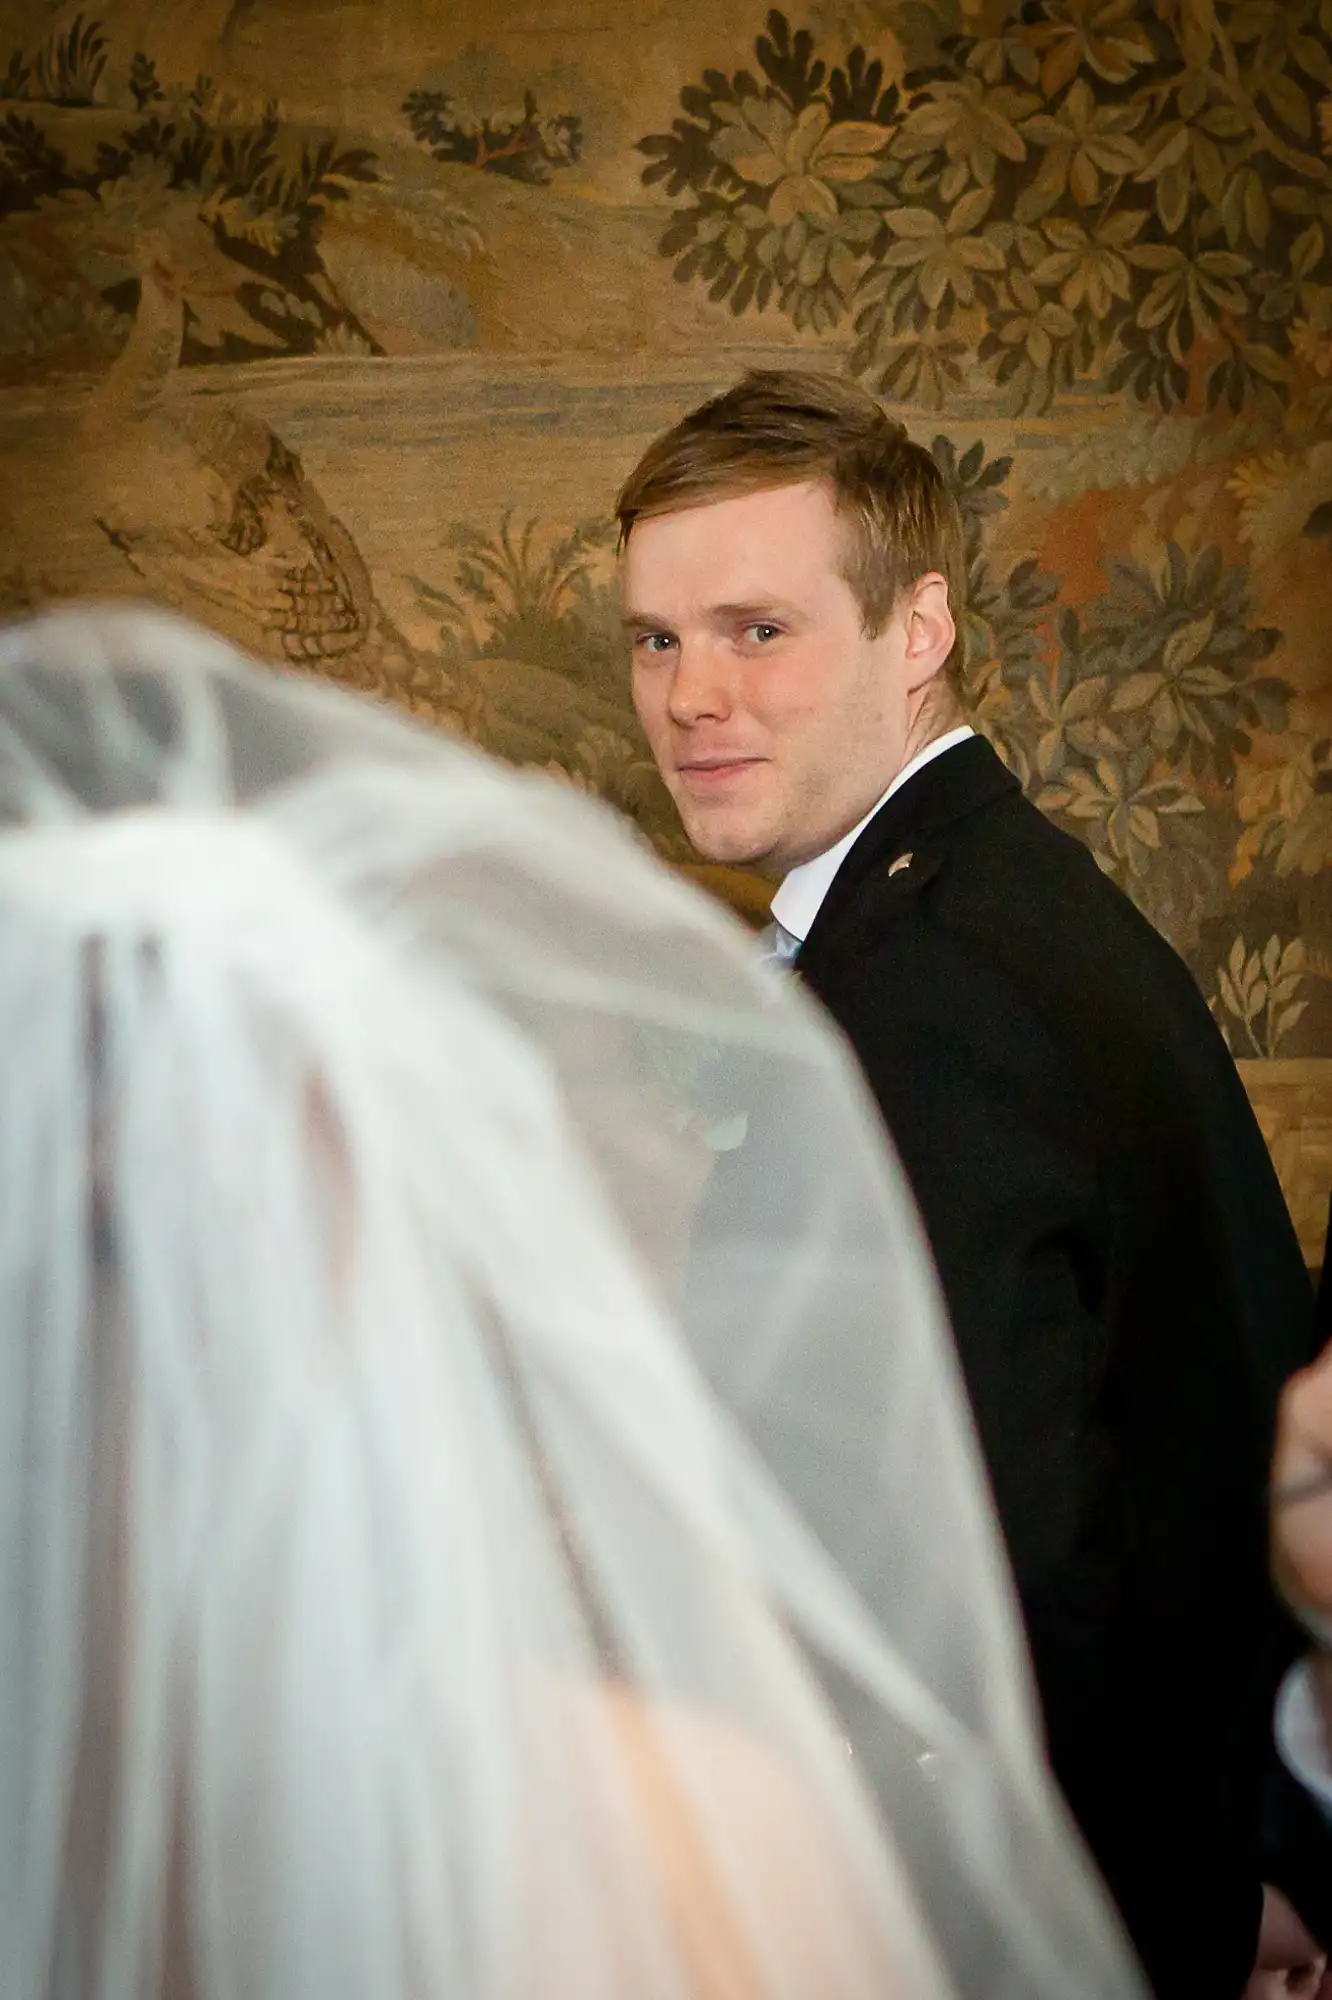 Groom in a black suit glancing back over his shoulder at the bride, whose white veil is softly focused in the foreground.